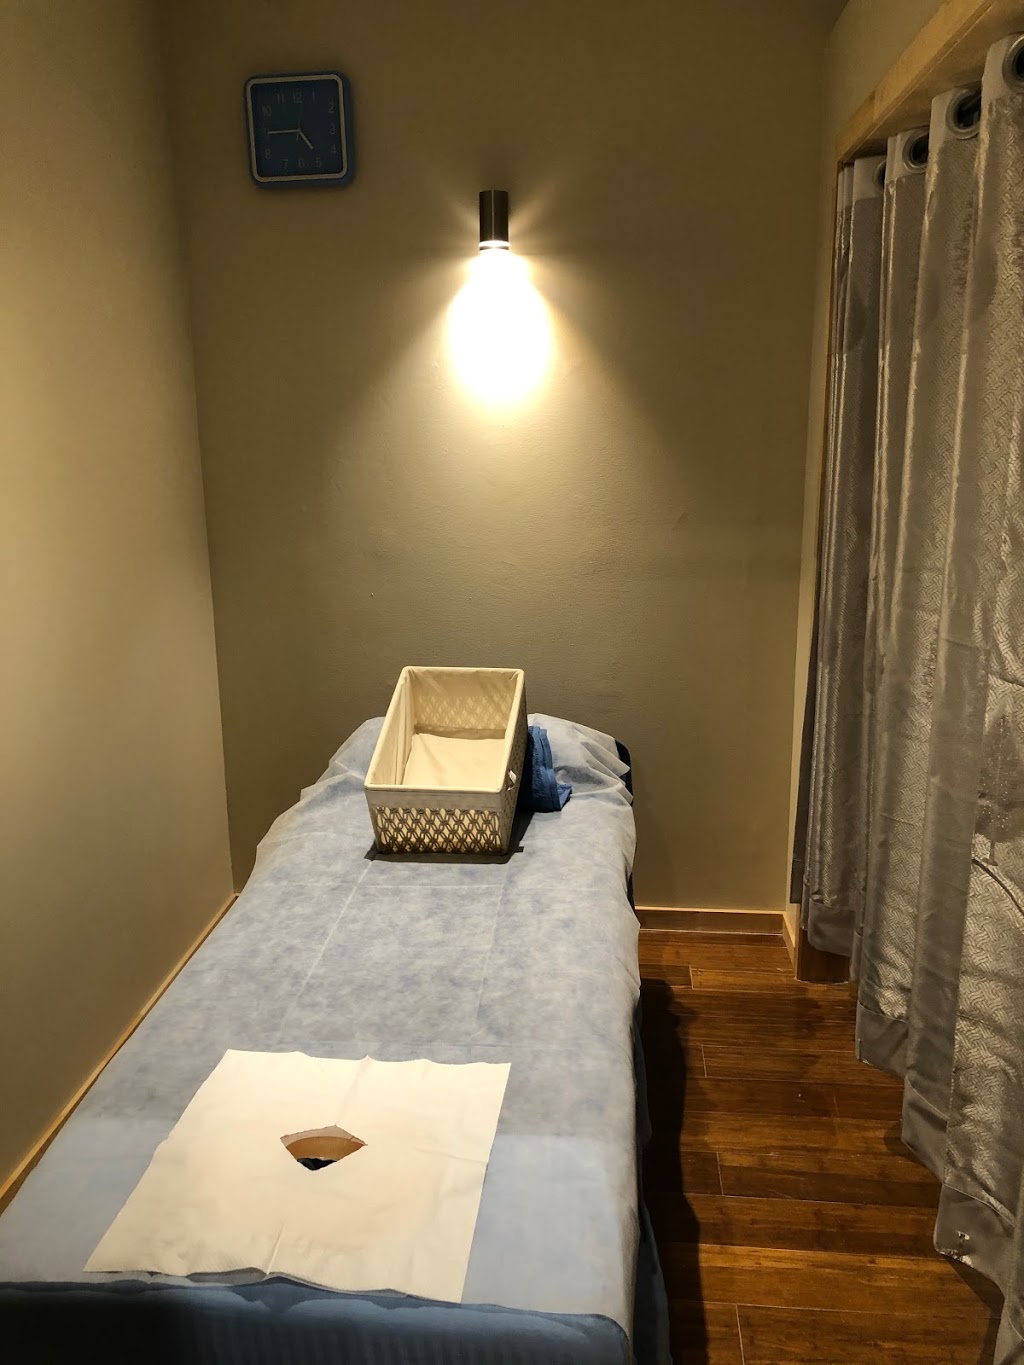 Caboolture Modern Massage & Beauty | spa | Shop33, Caboolture square, 60-78 King St, Caboolture QLD 4510, Australia | 0753301441 OR +61 7 5330 1441